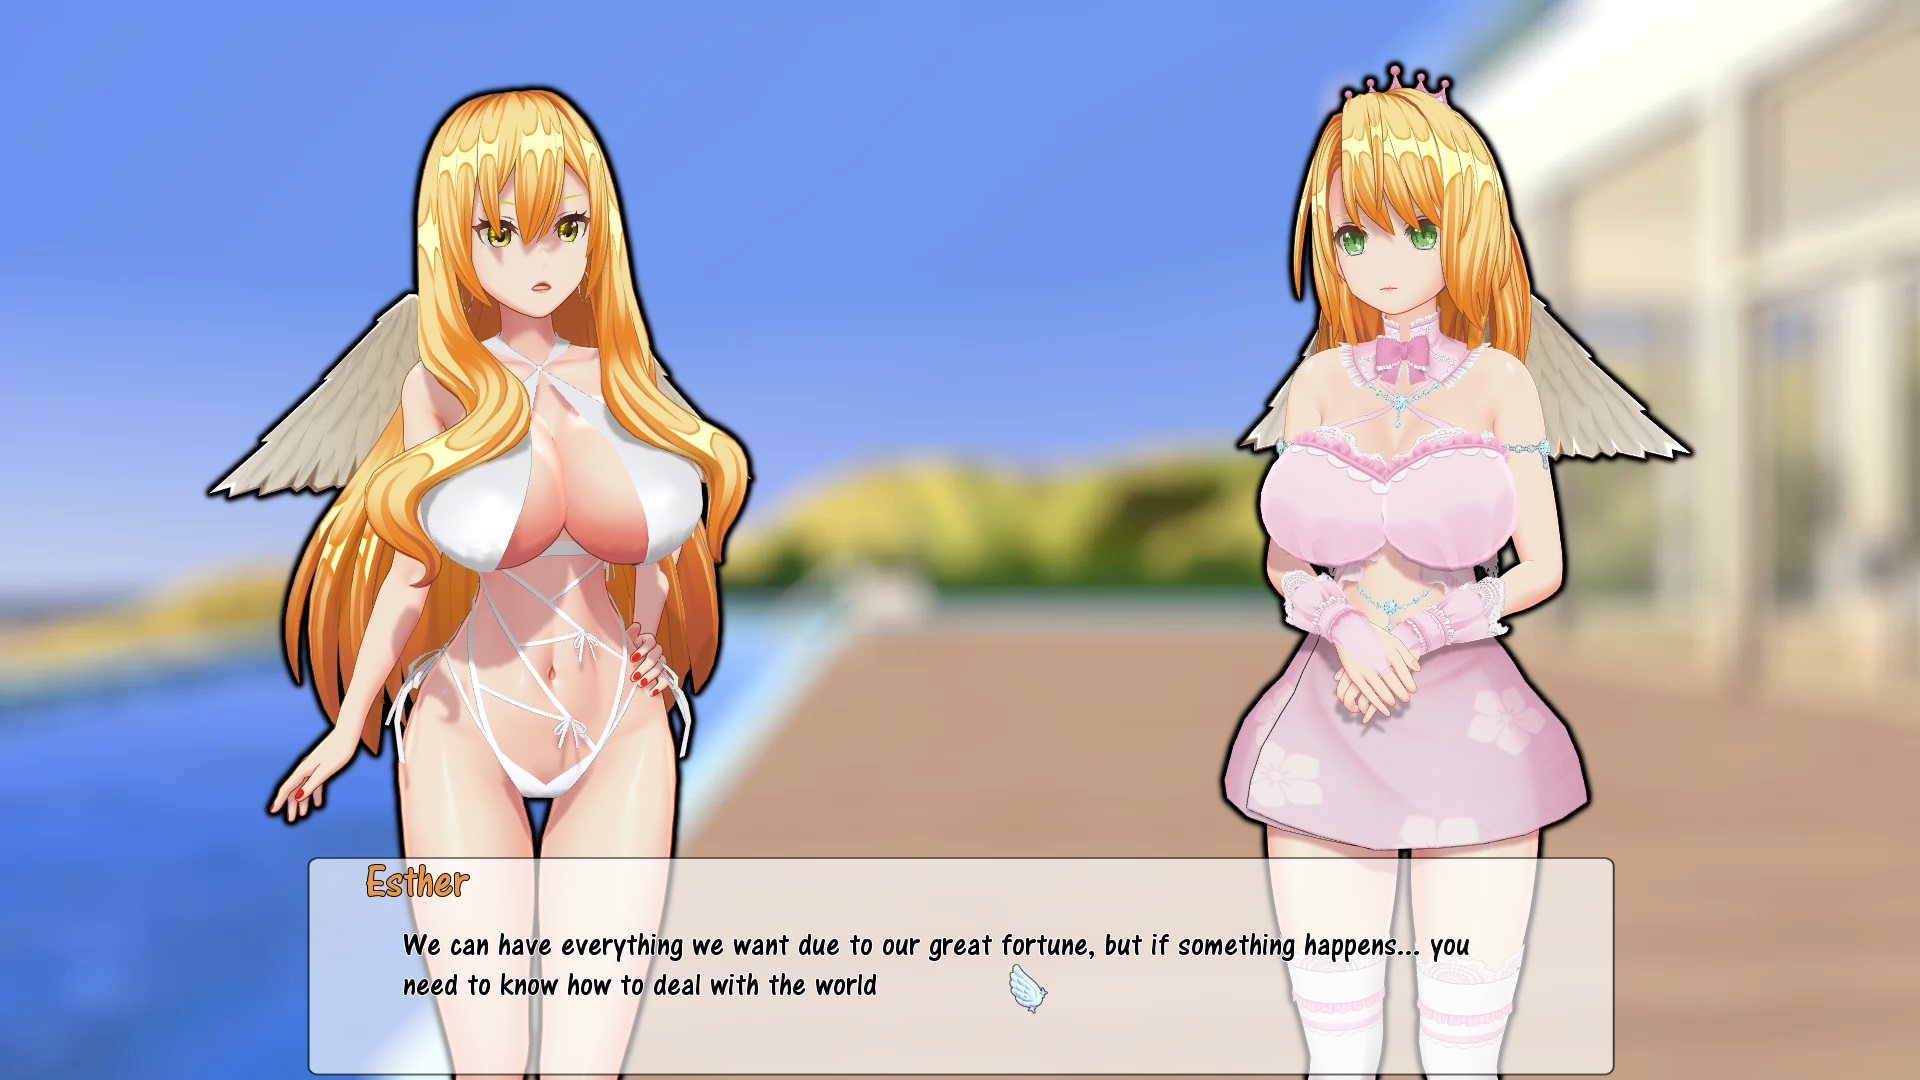 The Lewd Corruption of the Heaven - free game download, reviews, mega -  xGames